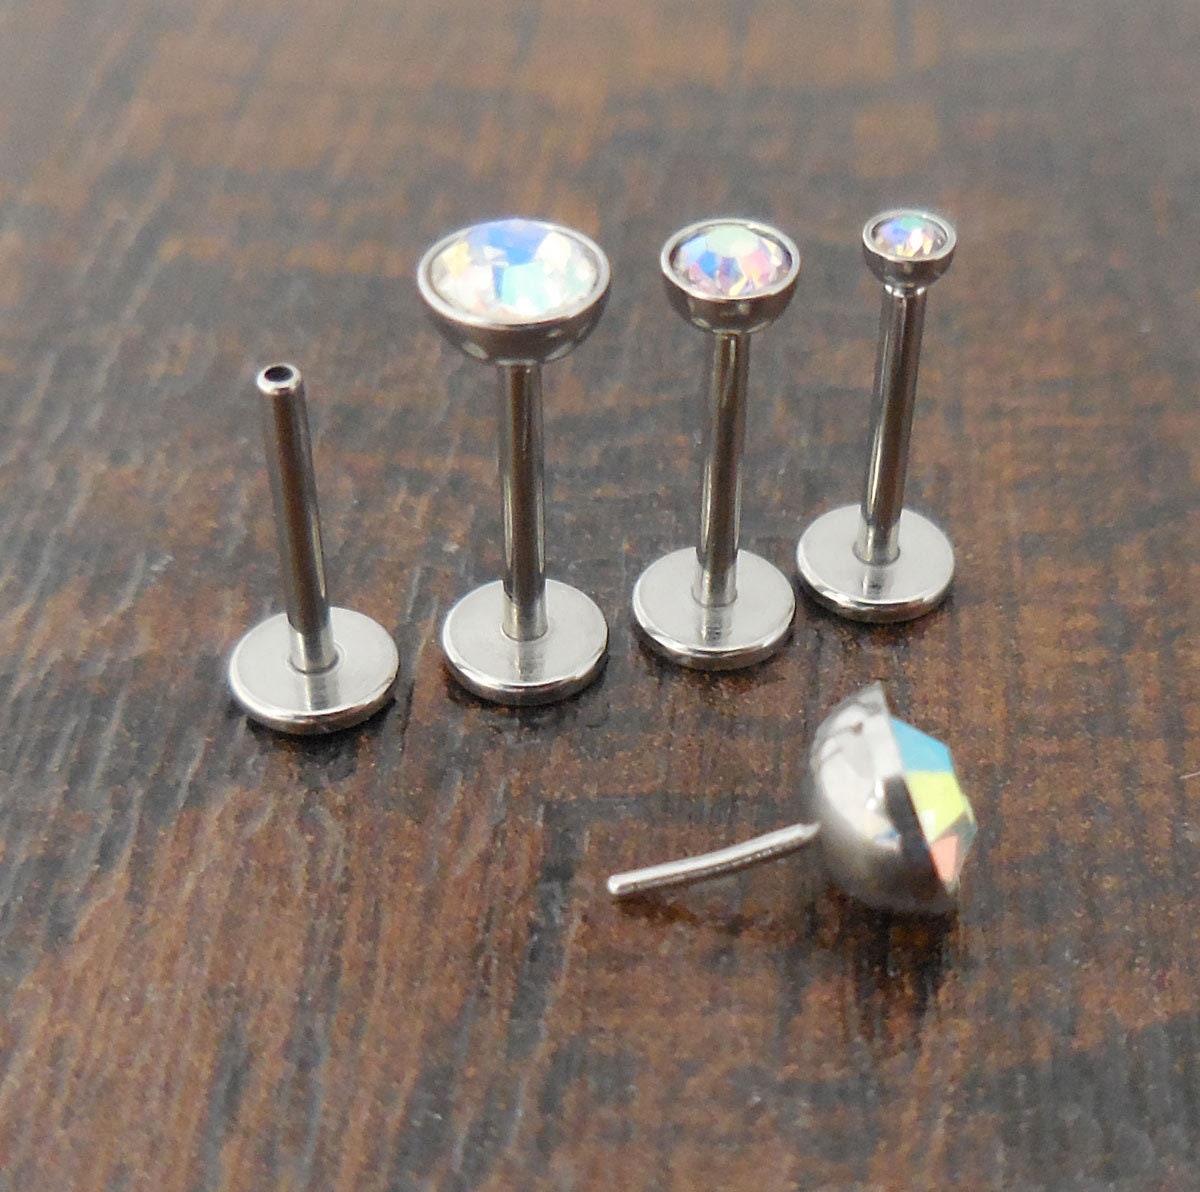 AB Aurora Borealis 6mm or 8mm 18g 2, 3, 4 or 5mm Thread less Push Pin Tragus Triple Helix Earring Cartilage Labret Stainless Nose Ring